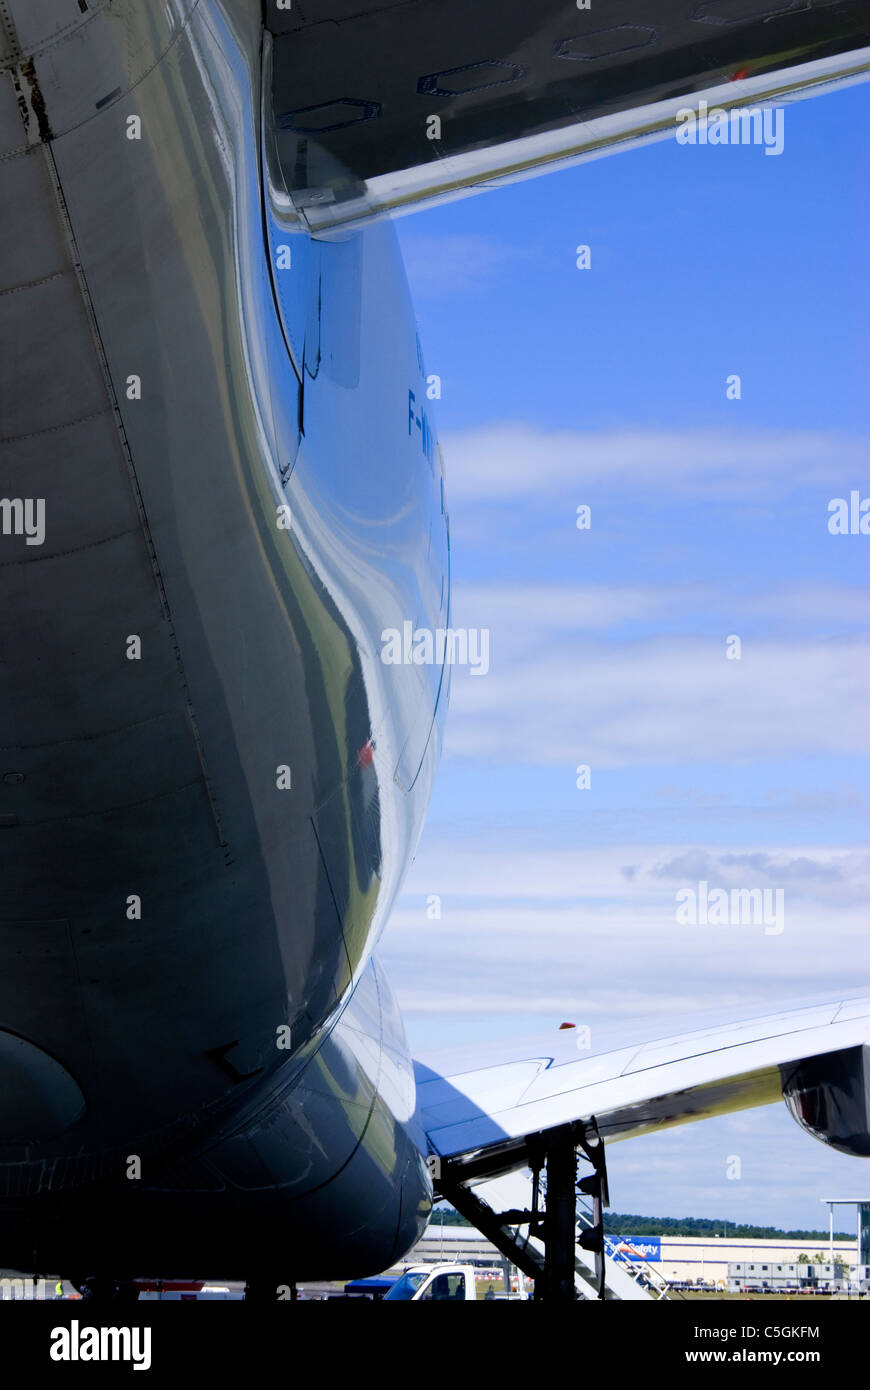 Reflections in the fuselage of an Airbus A380 passenger aircraft Stock Photo